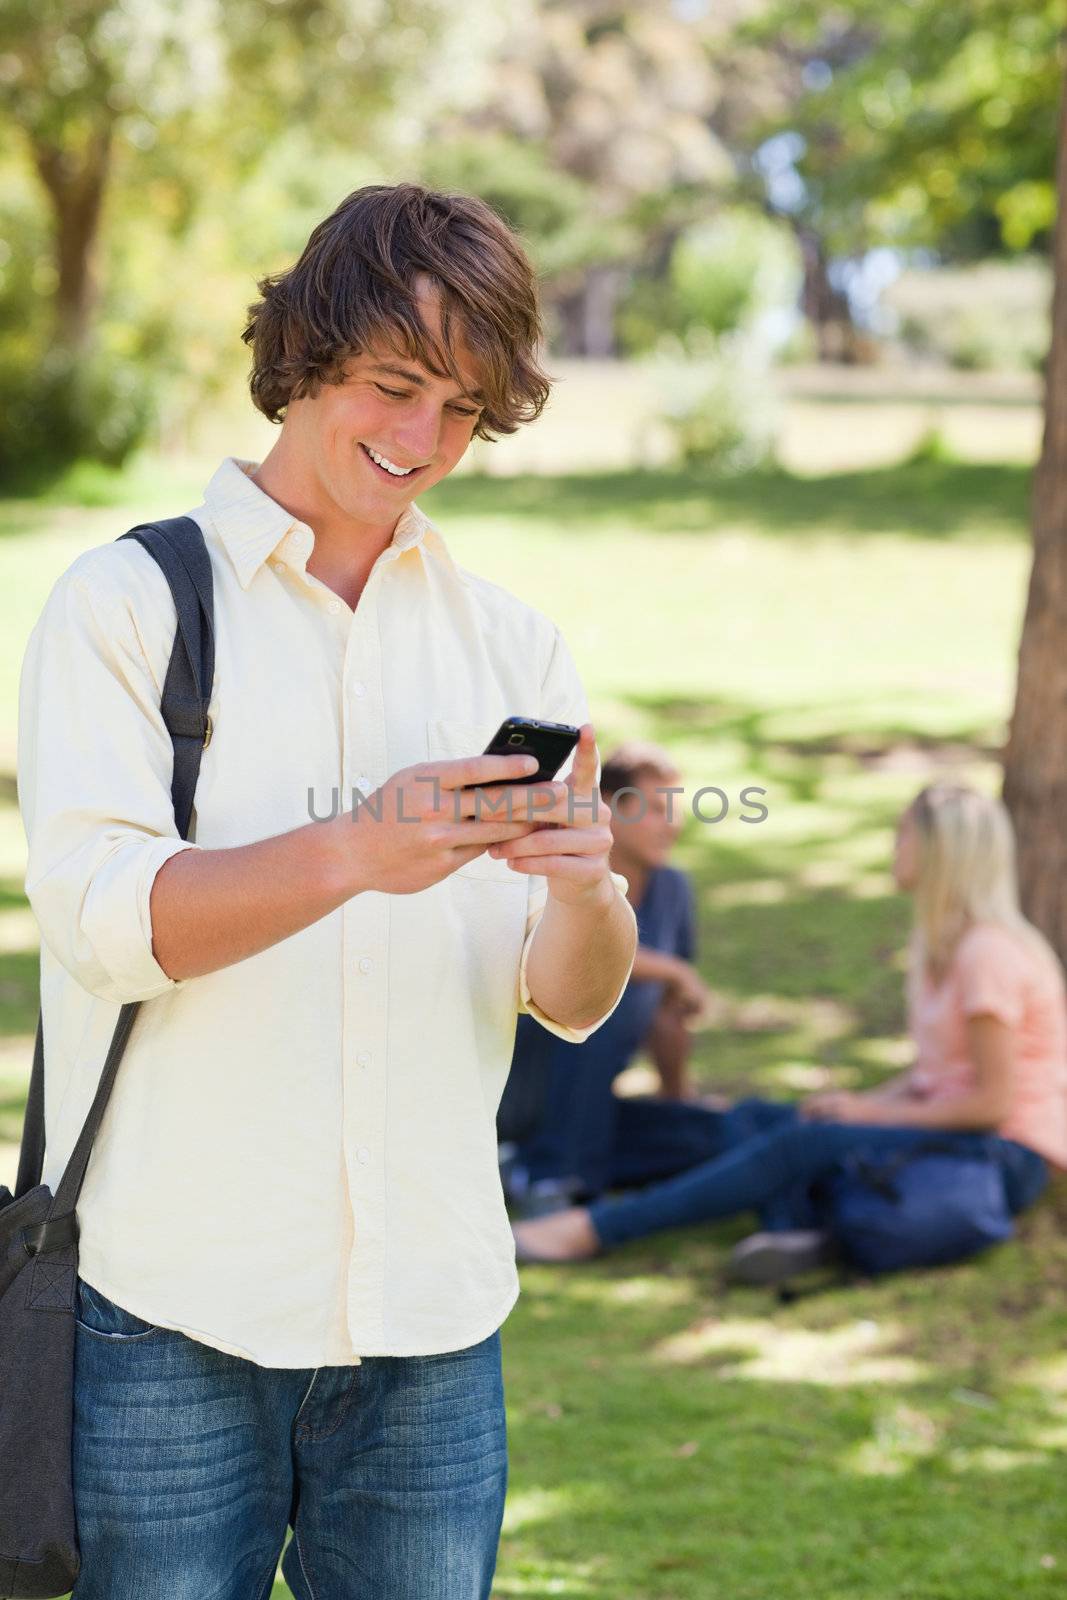 Young man using a smartphone in a park with friends in background